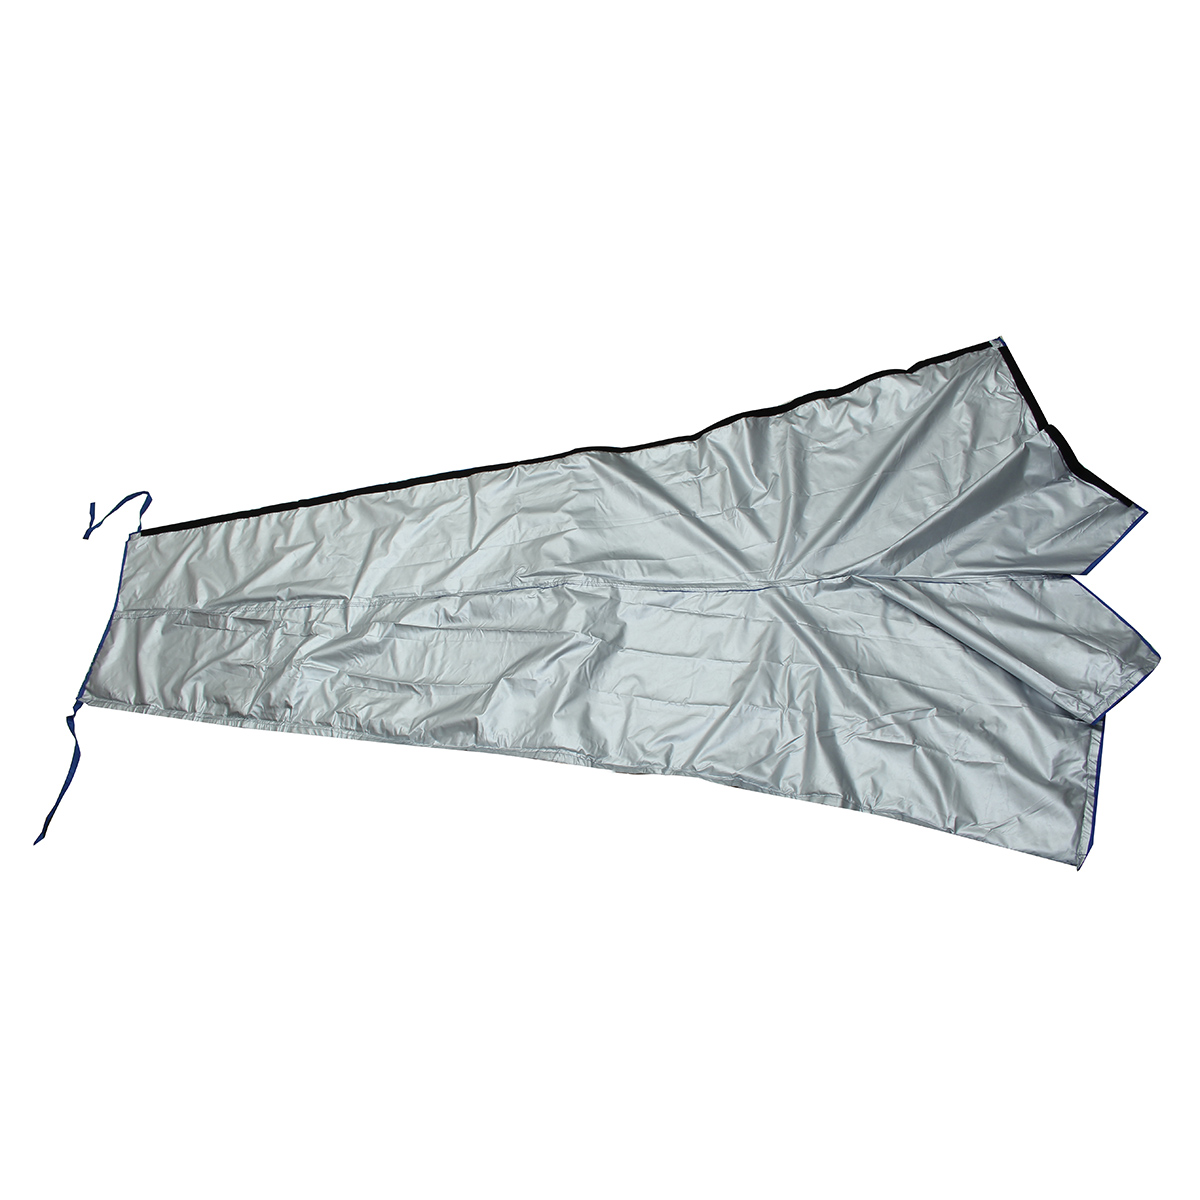 420D 8-9Ft Sailboat Cover Blue Sail Cover Mainsail Boom Waterproof Protection